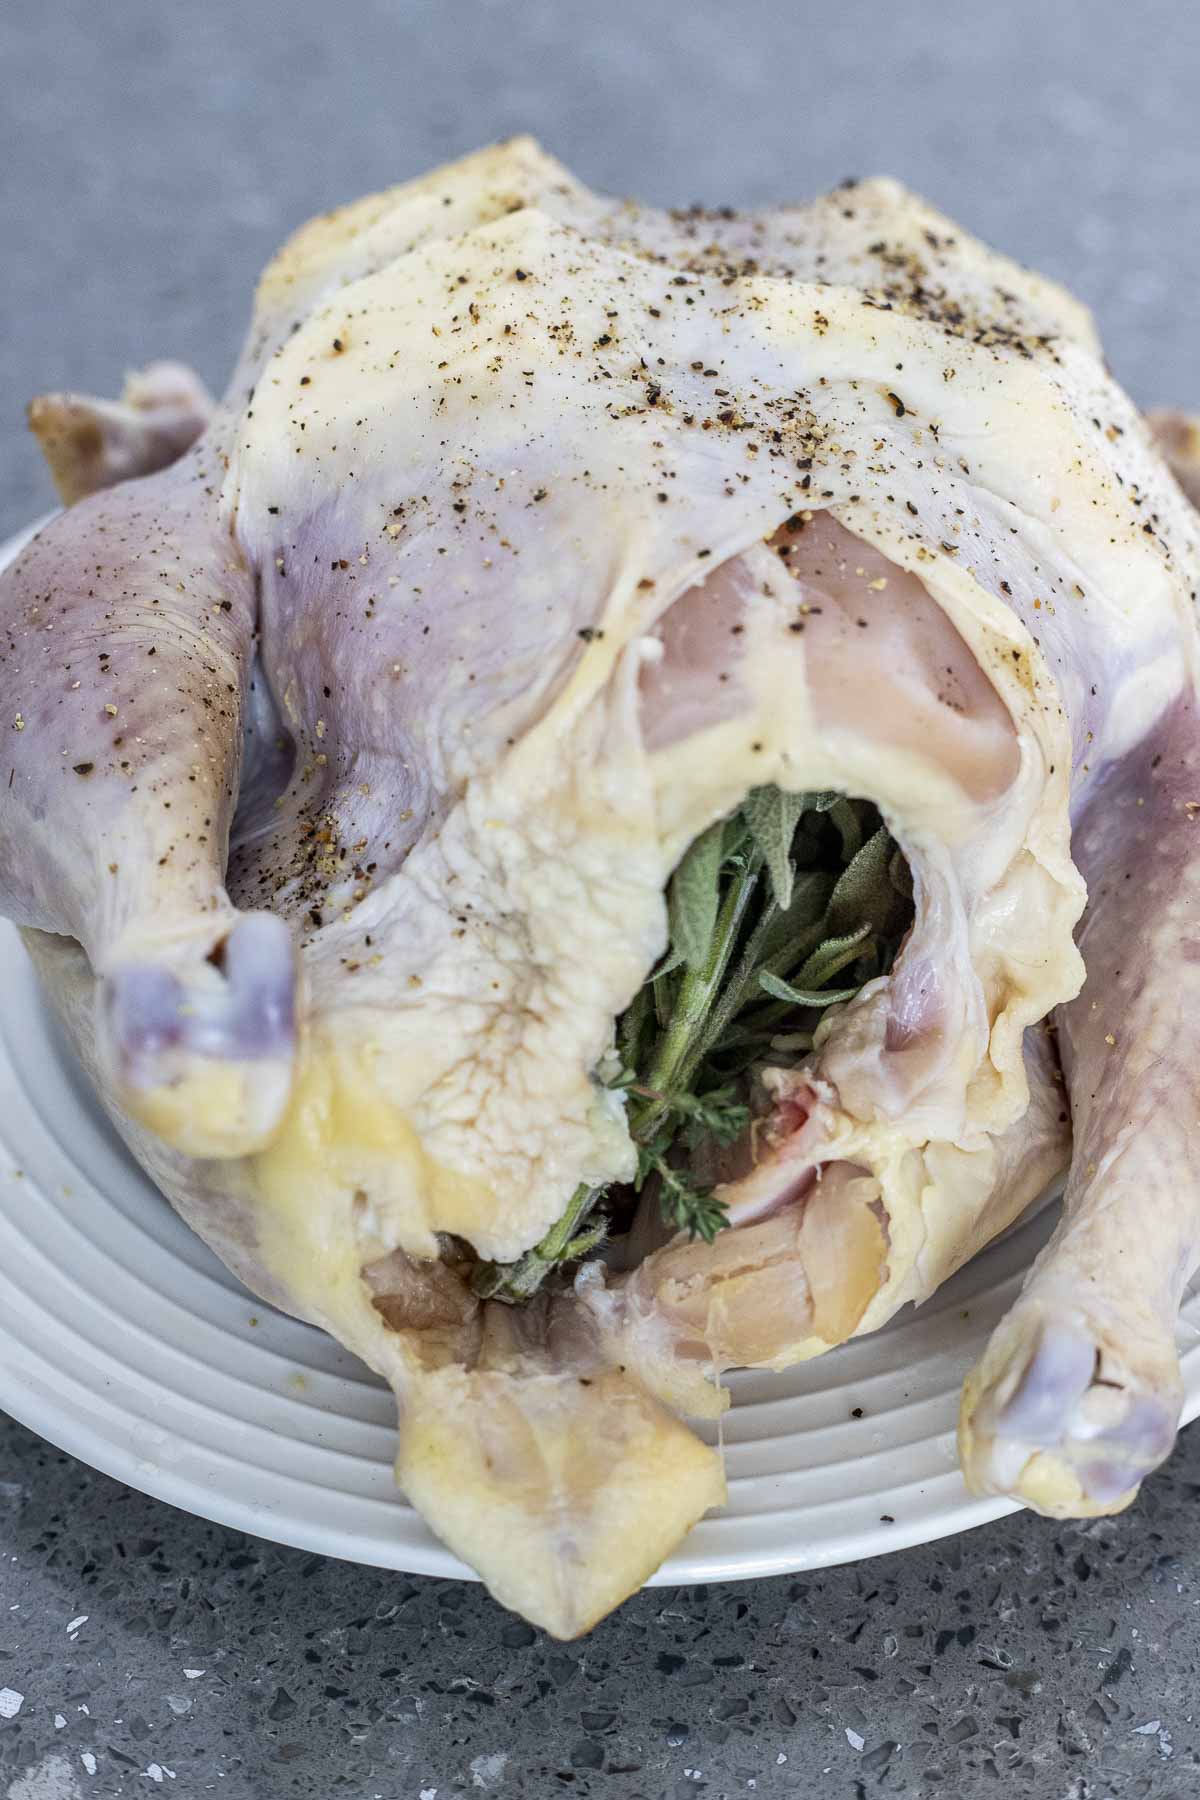 Whole raw chicken on a white plate with butter pieces under the skin and fresh herbs visible in the cavity.